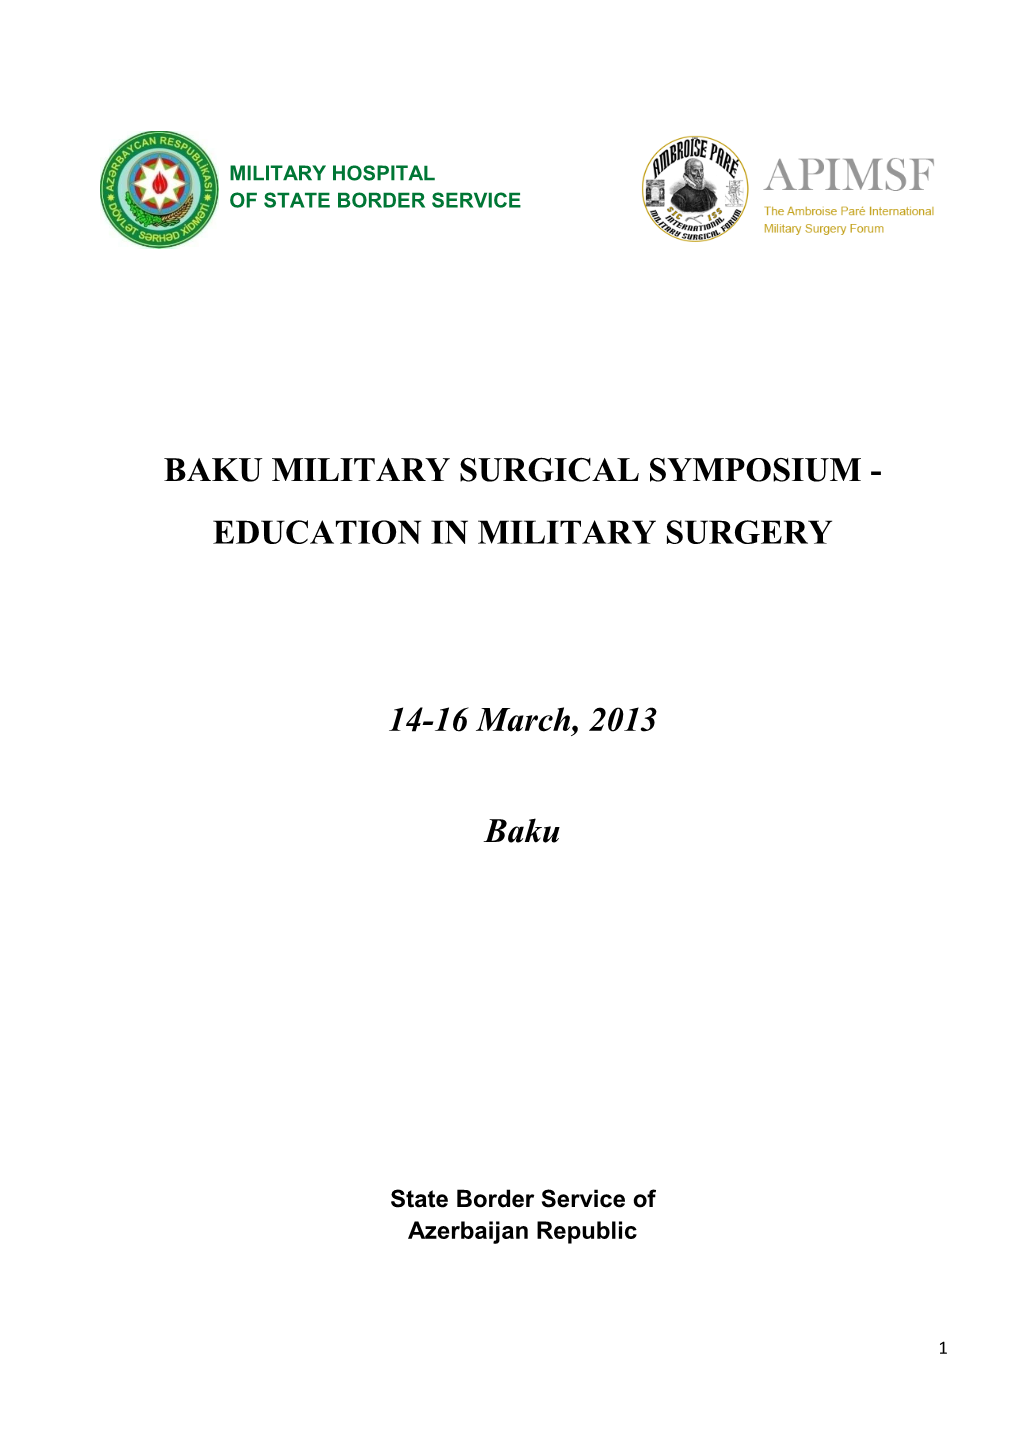 Baku Military Surgical Symposium - Education in Military Surgery